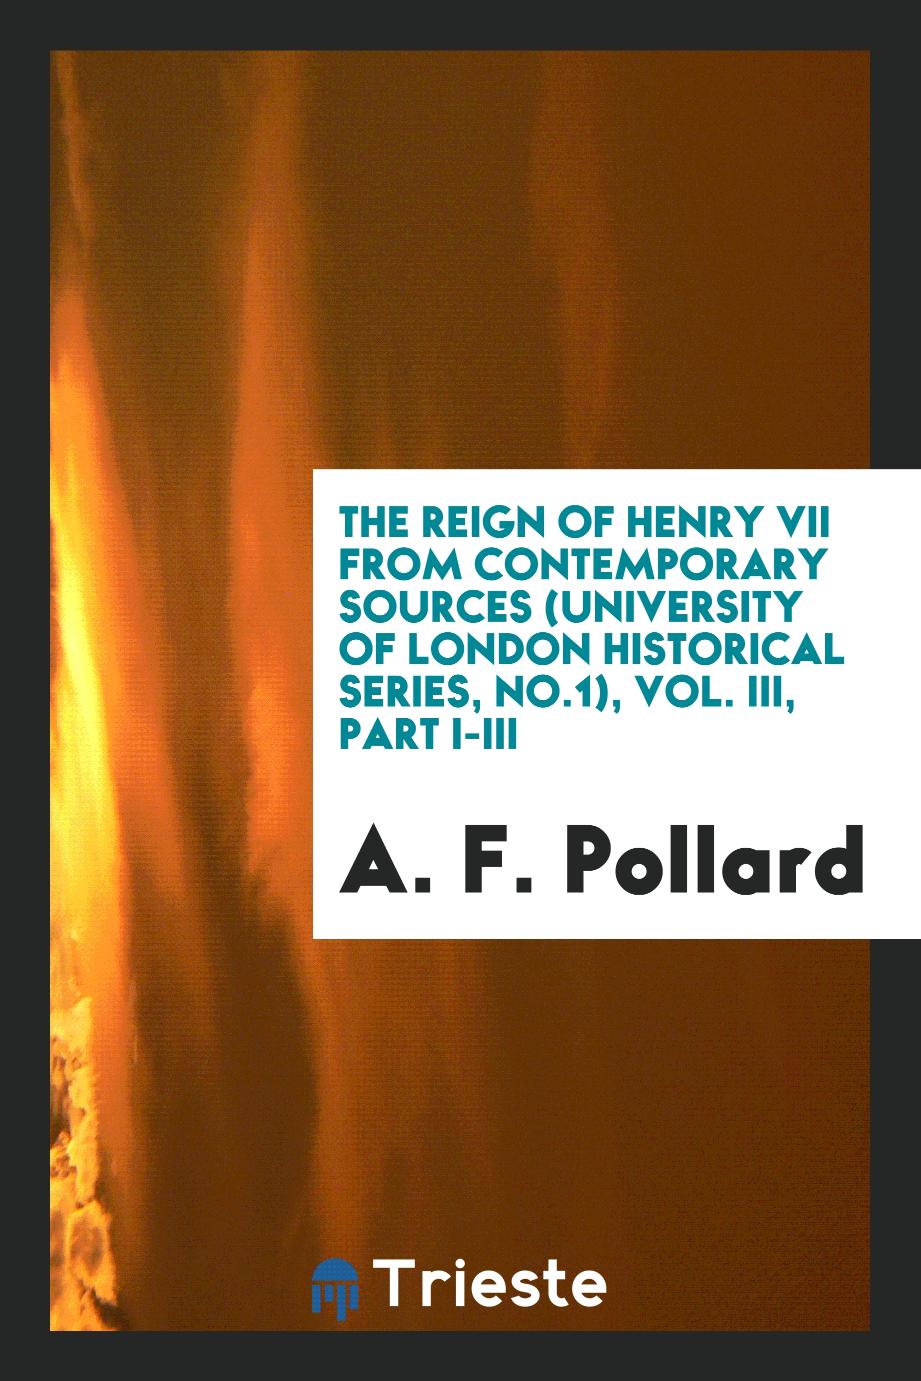 The Reign of Henry VII from Contemporary Sources (University of London Historical Series, No.1), Vol. III, Part I-III